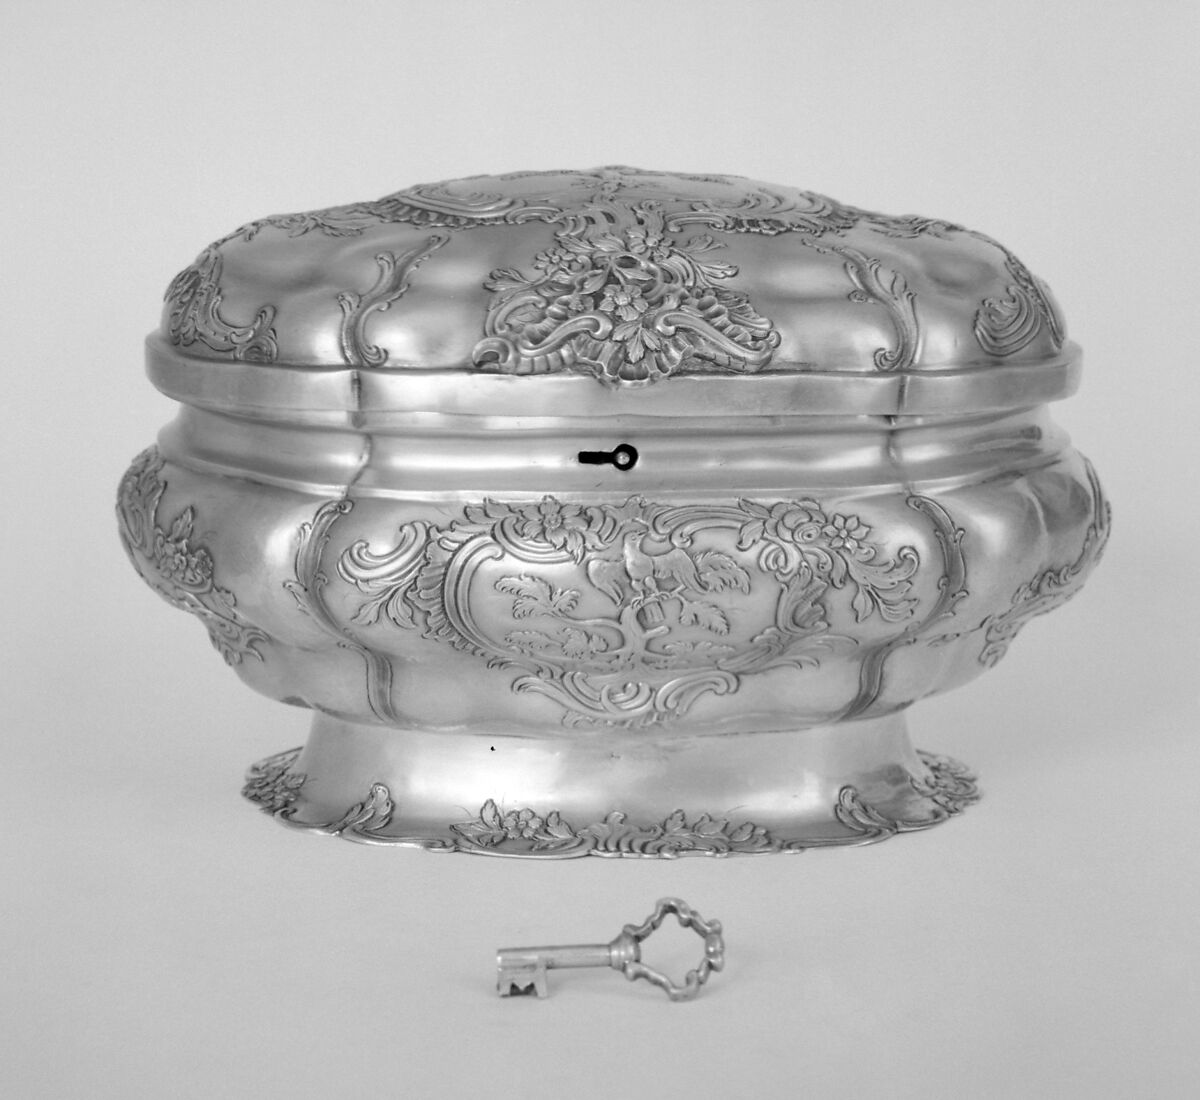 Large oval box (one of a pair), Gottlieb Satzger (ca. 1709–1783, master 1746), Silver gilt, German, Augsburg 